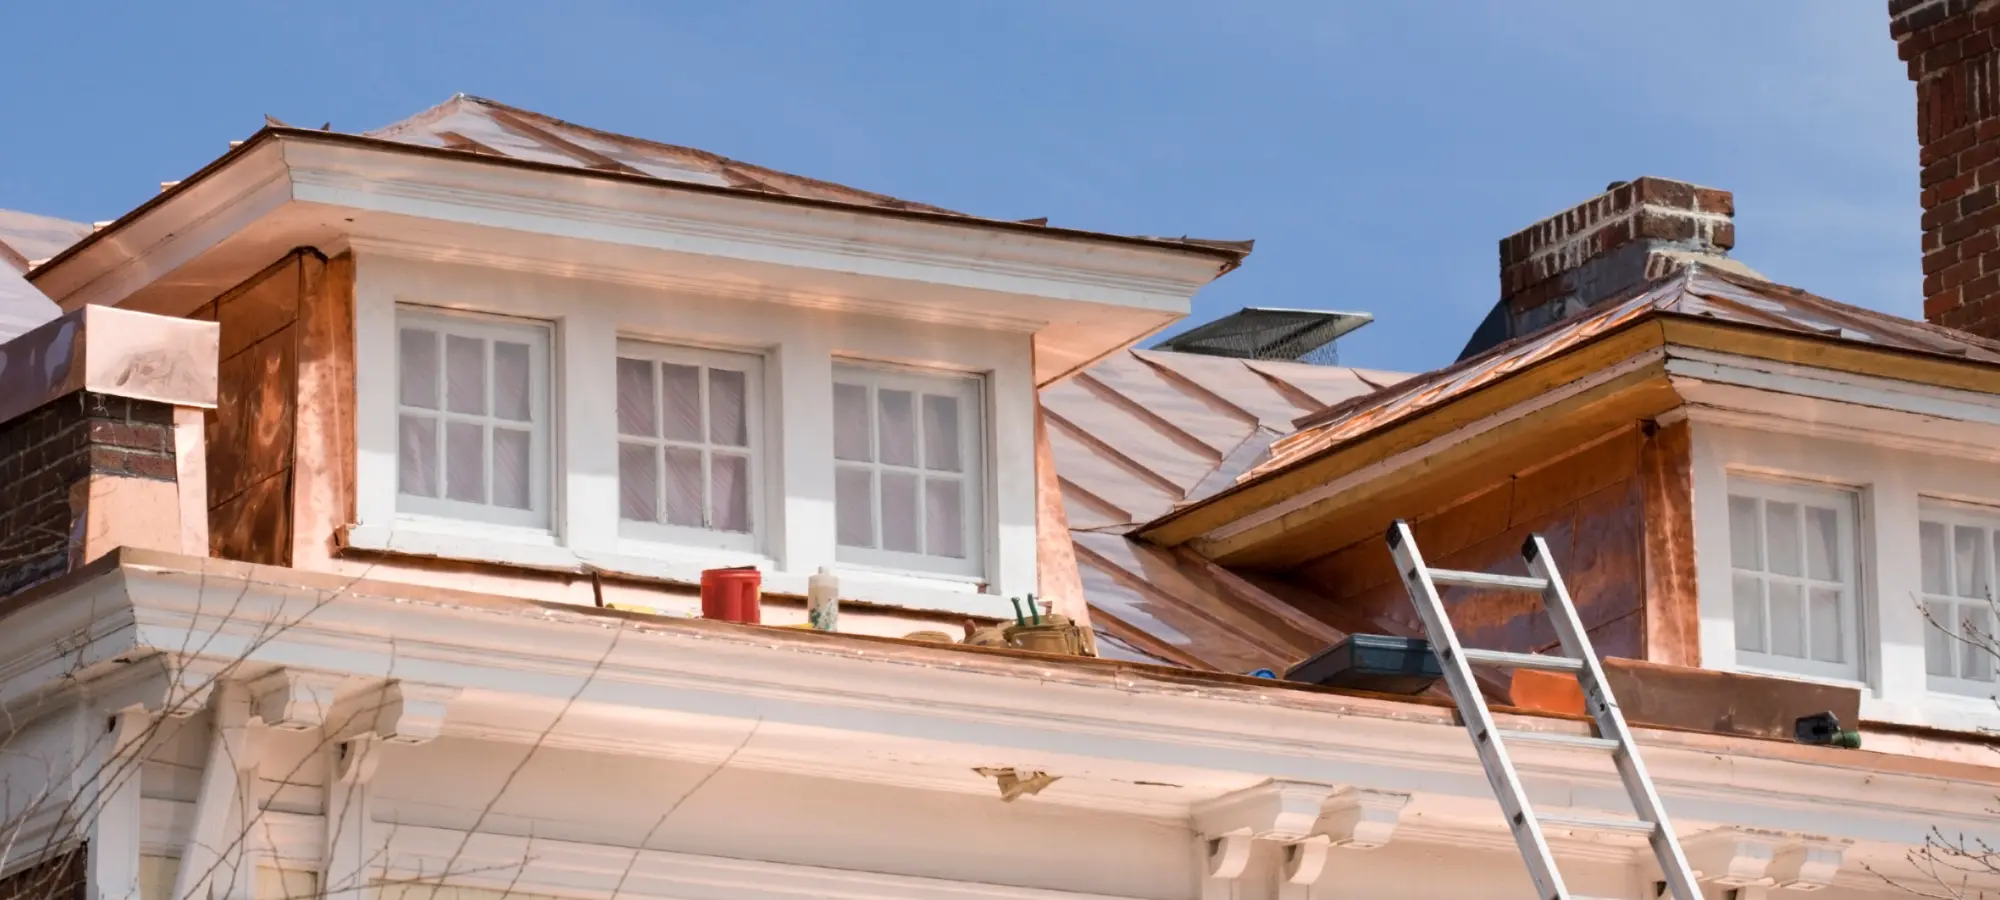 House Siding Services in White Plains, NY | MS Roofing Contractor